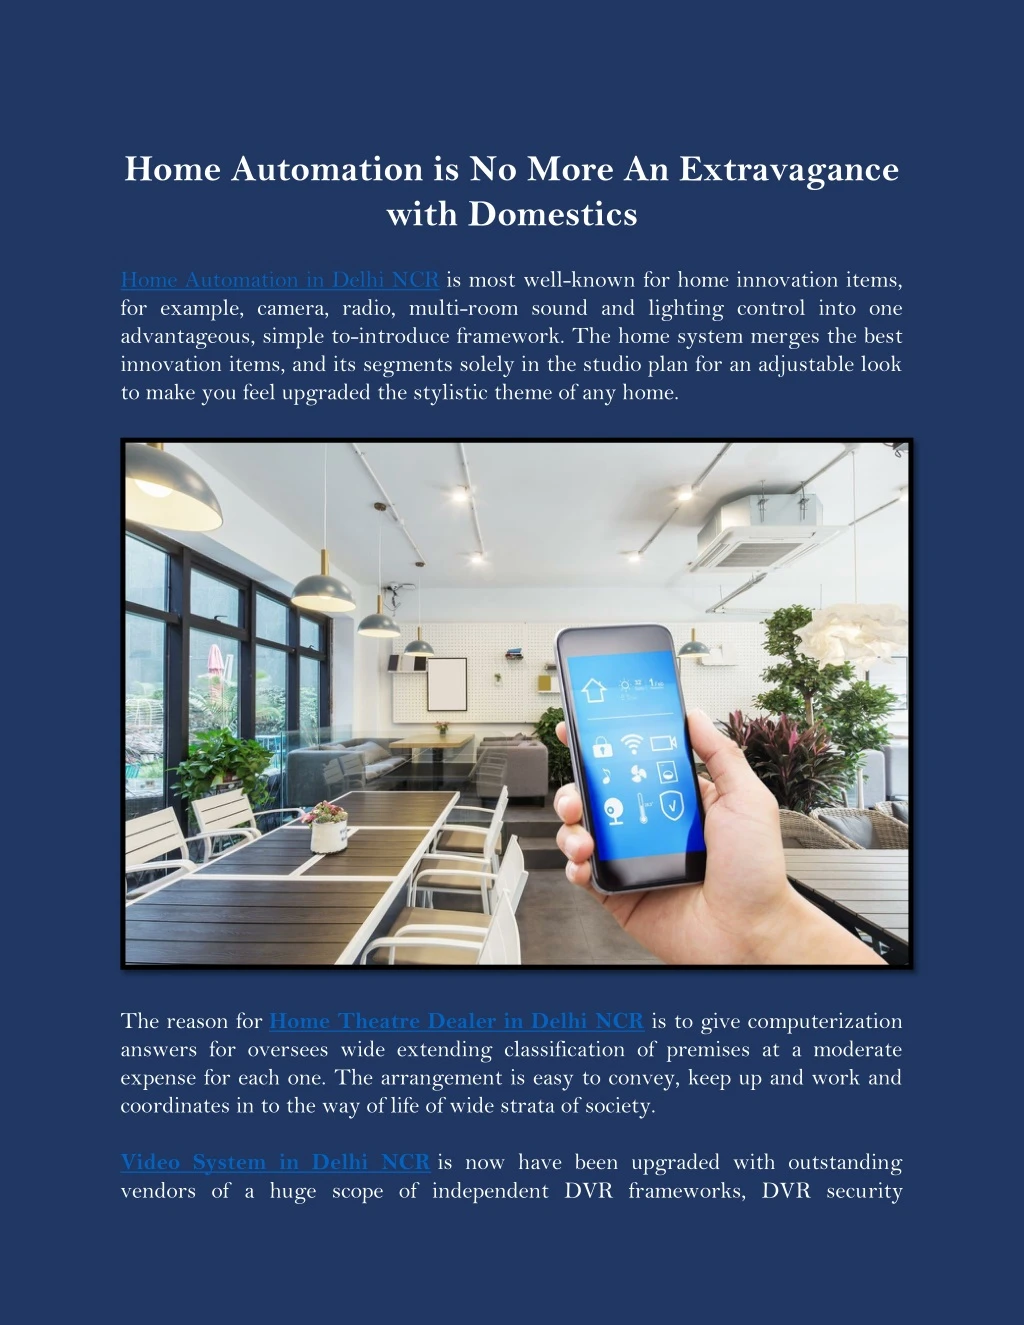 home automation is no more an extravagance with